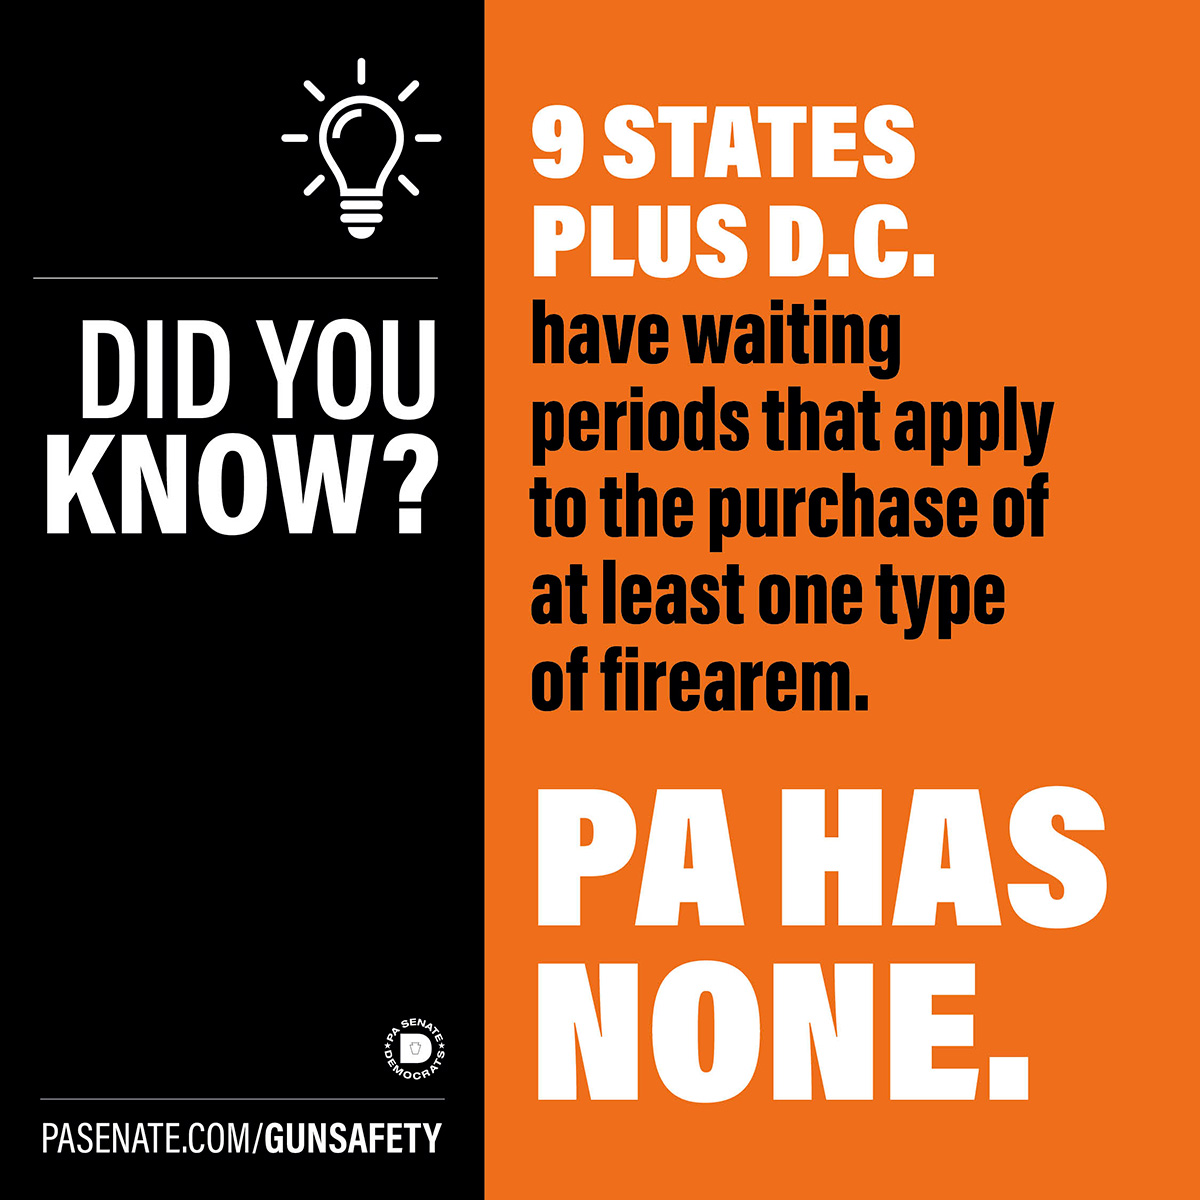 Did you know? 9 states plus D.C. have waiting periods that apply to the purchase of at least one type of firearm.